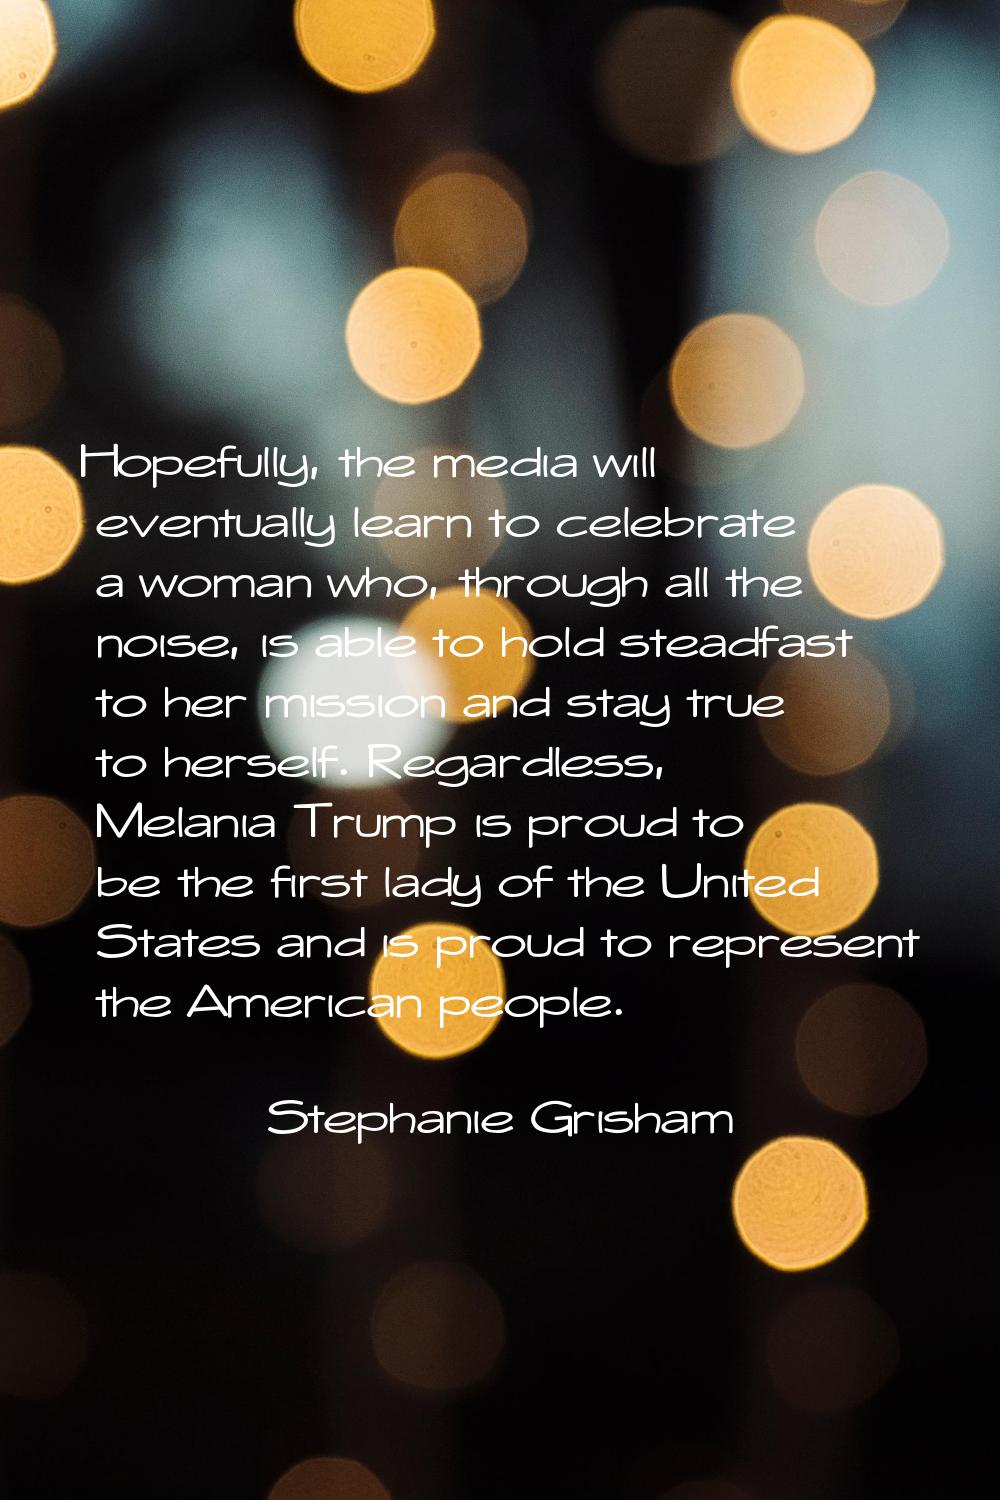 Hopefully, the media will eventually learn to celebrate a woman who, through all the noise, is able